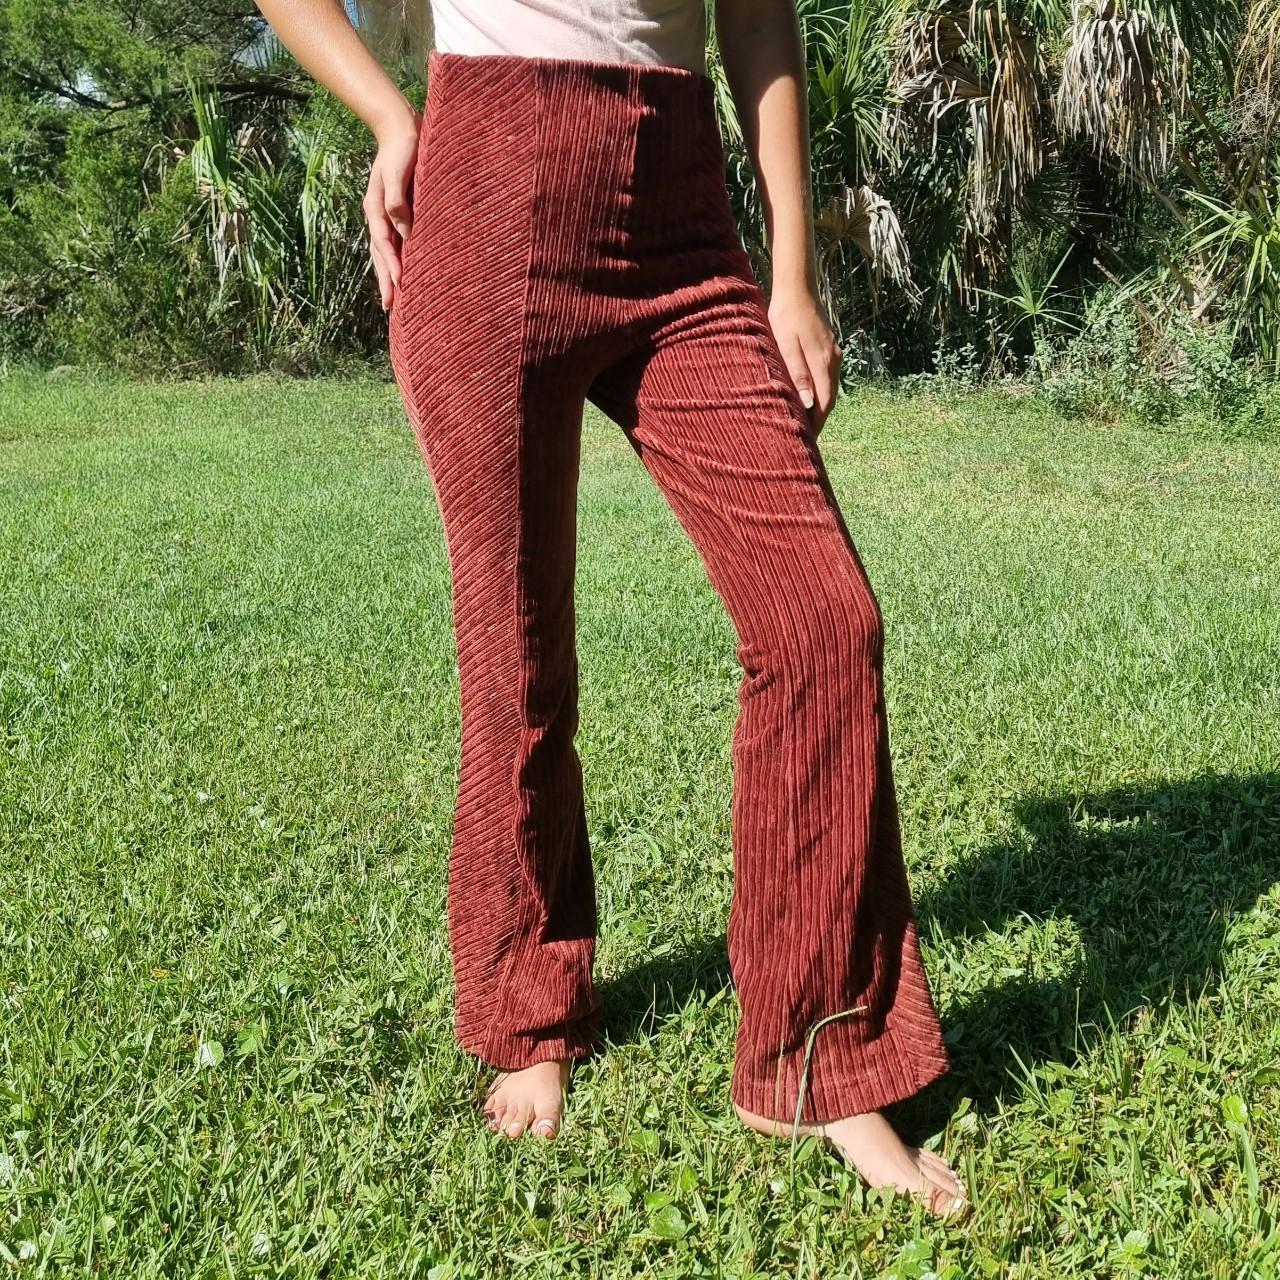 Free People corduroy flares 🌈ABOUT THE - Depop